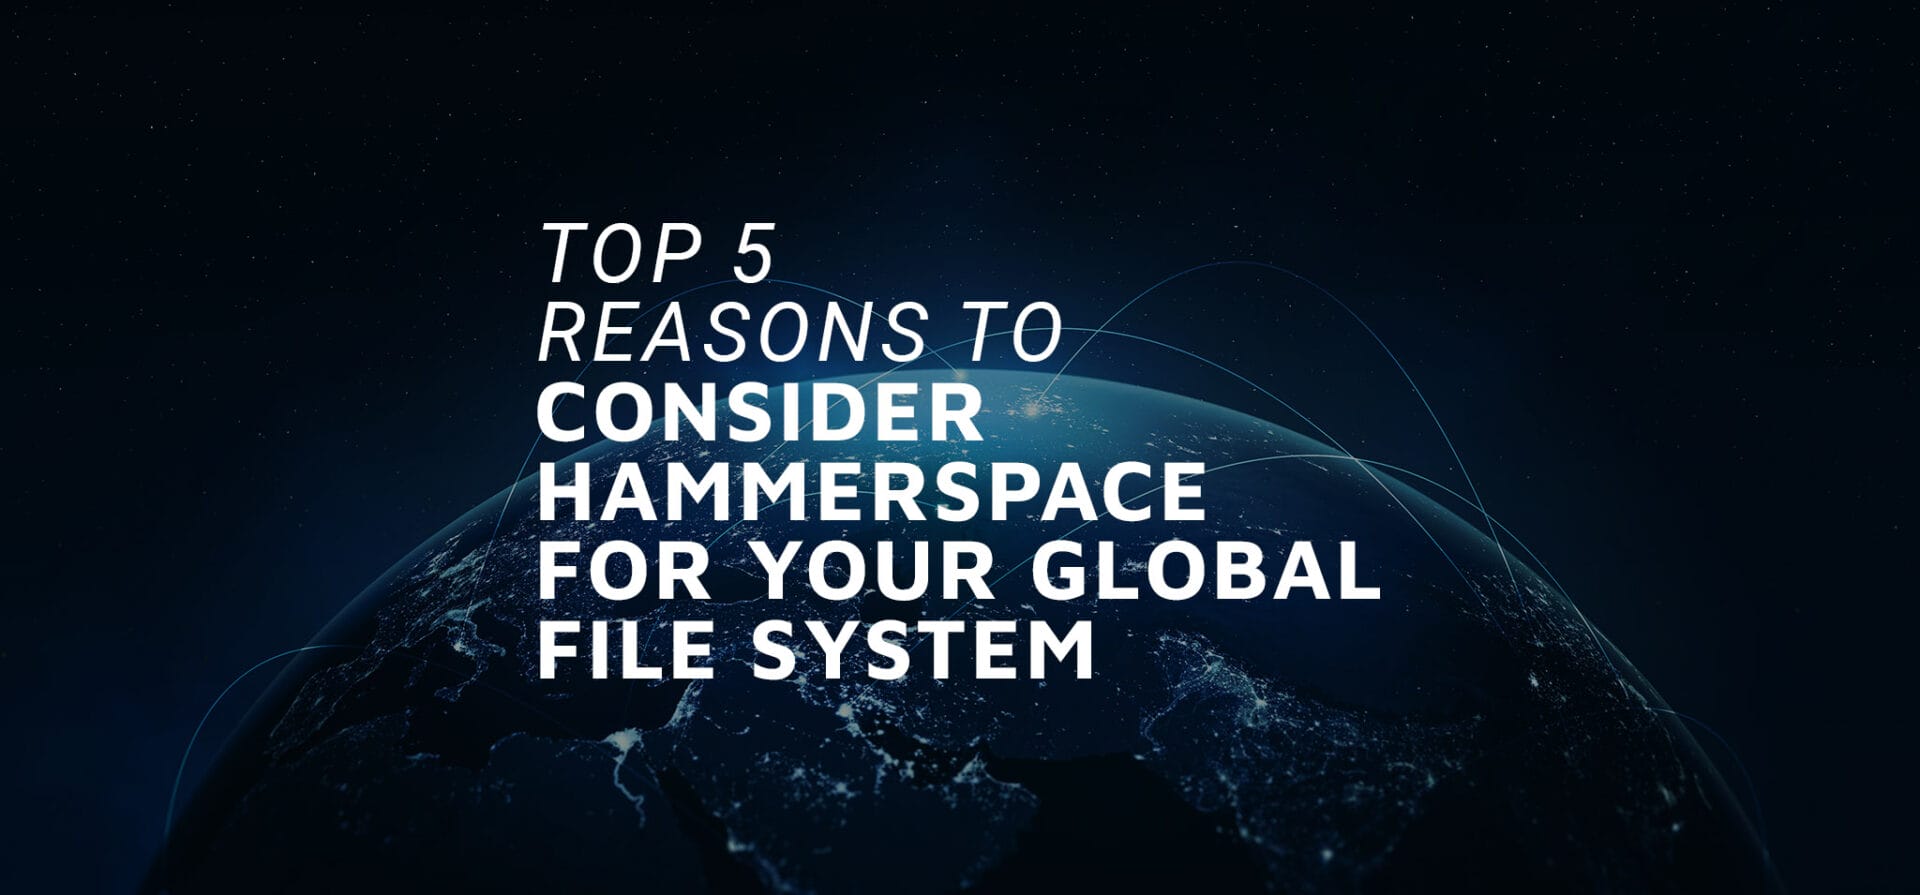 Top 5 Reasons to Consider Hammerspace for Your Global File System